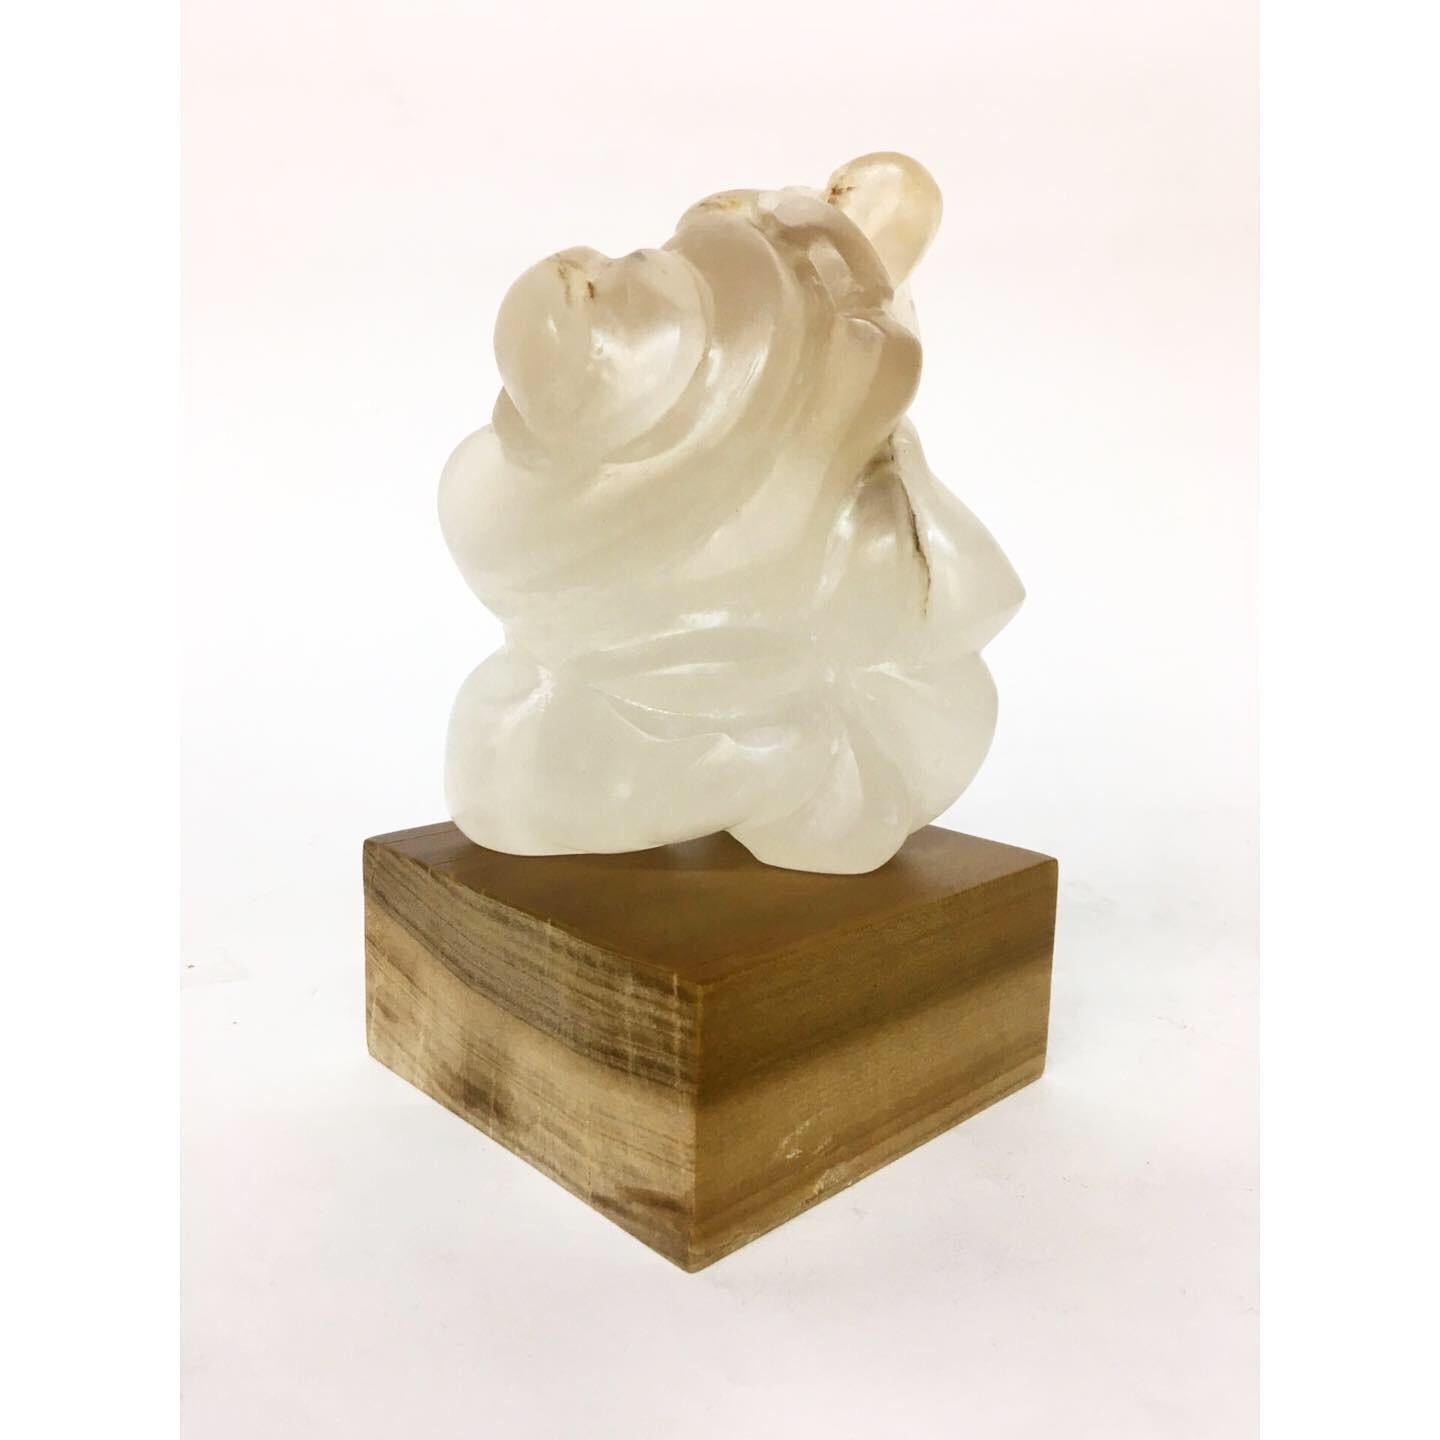 "LUSCIOUS" sculpture by Melanie Newcombe
Hand carved alabaster stone with or without the wooden base
The alabaster stone is reversible 
5" x 4.5" x 5" inch
2018

* * * Melanie Newcombe * * *
Melanie Newcombe is an American sculptor who lives and